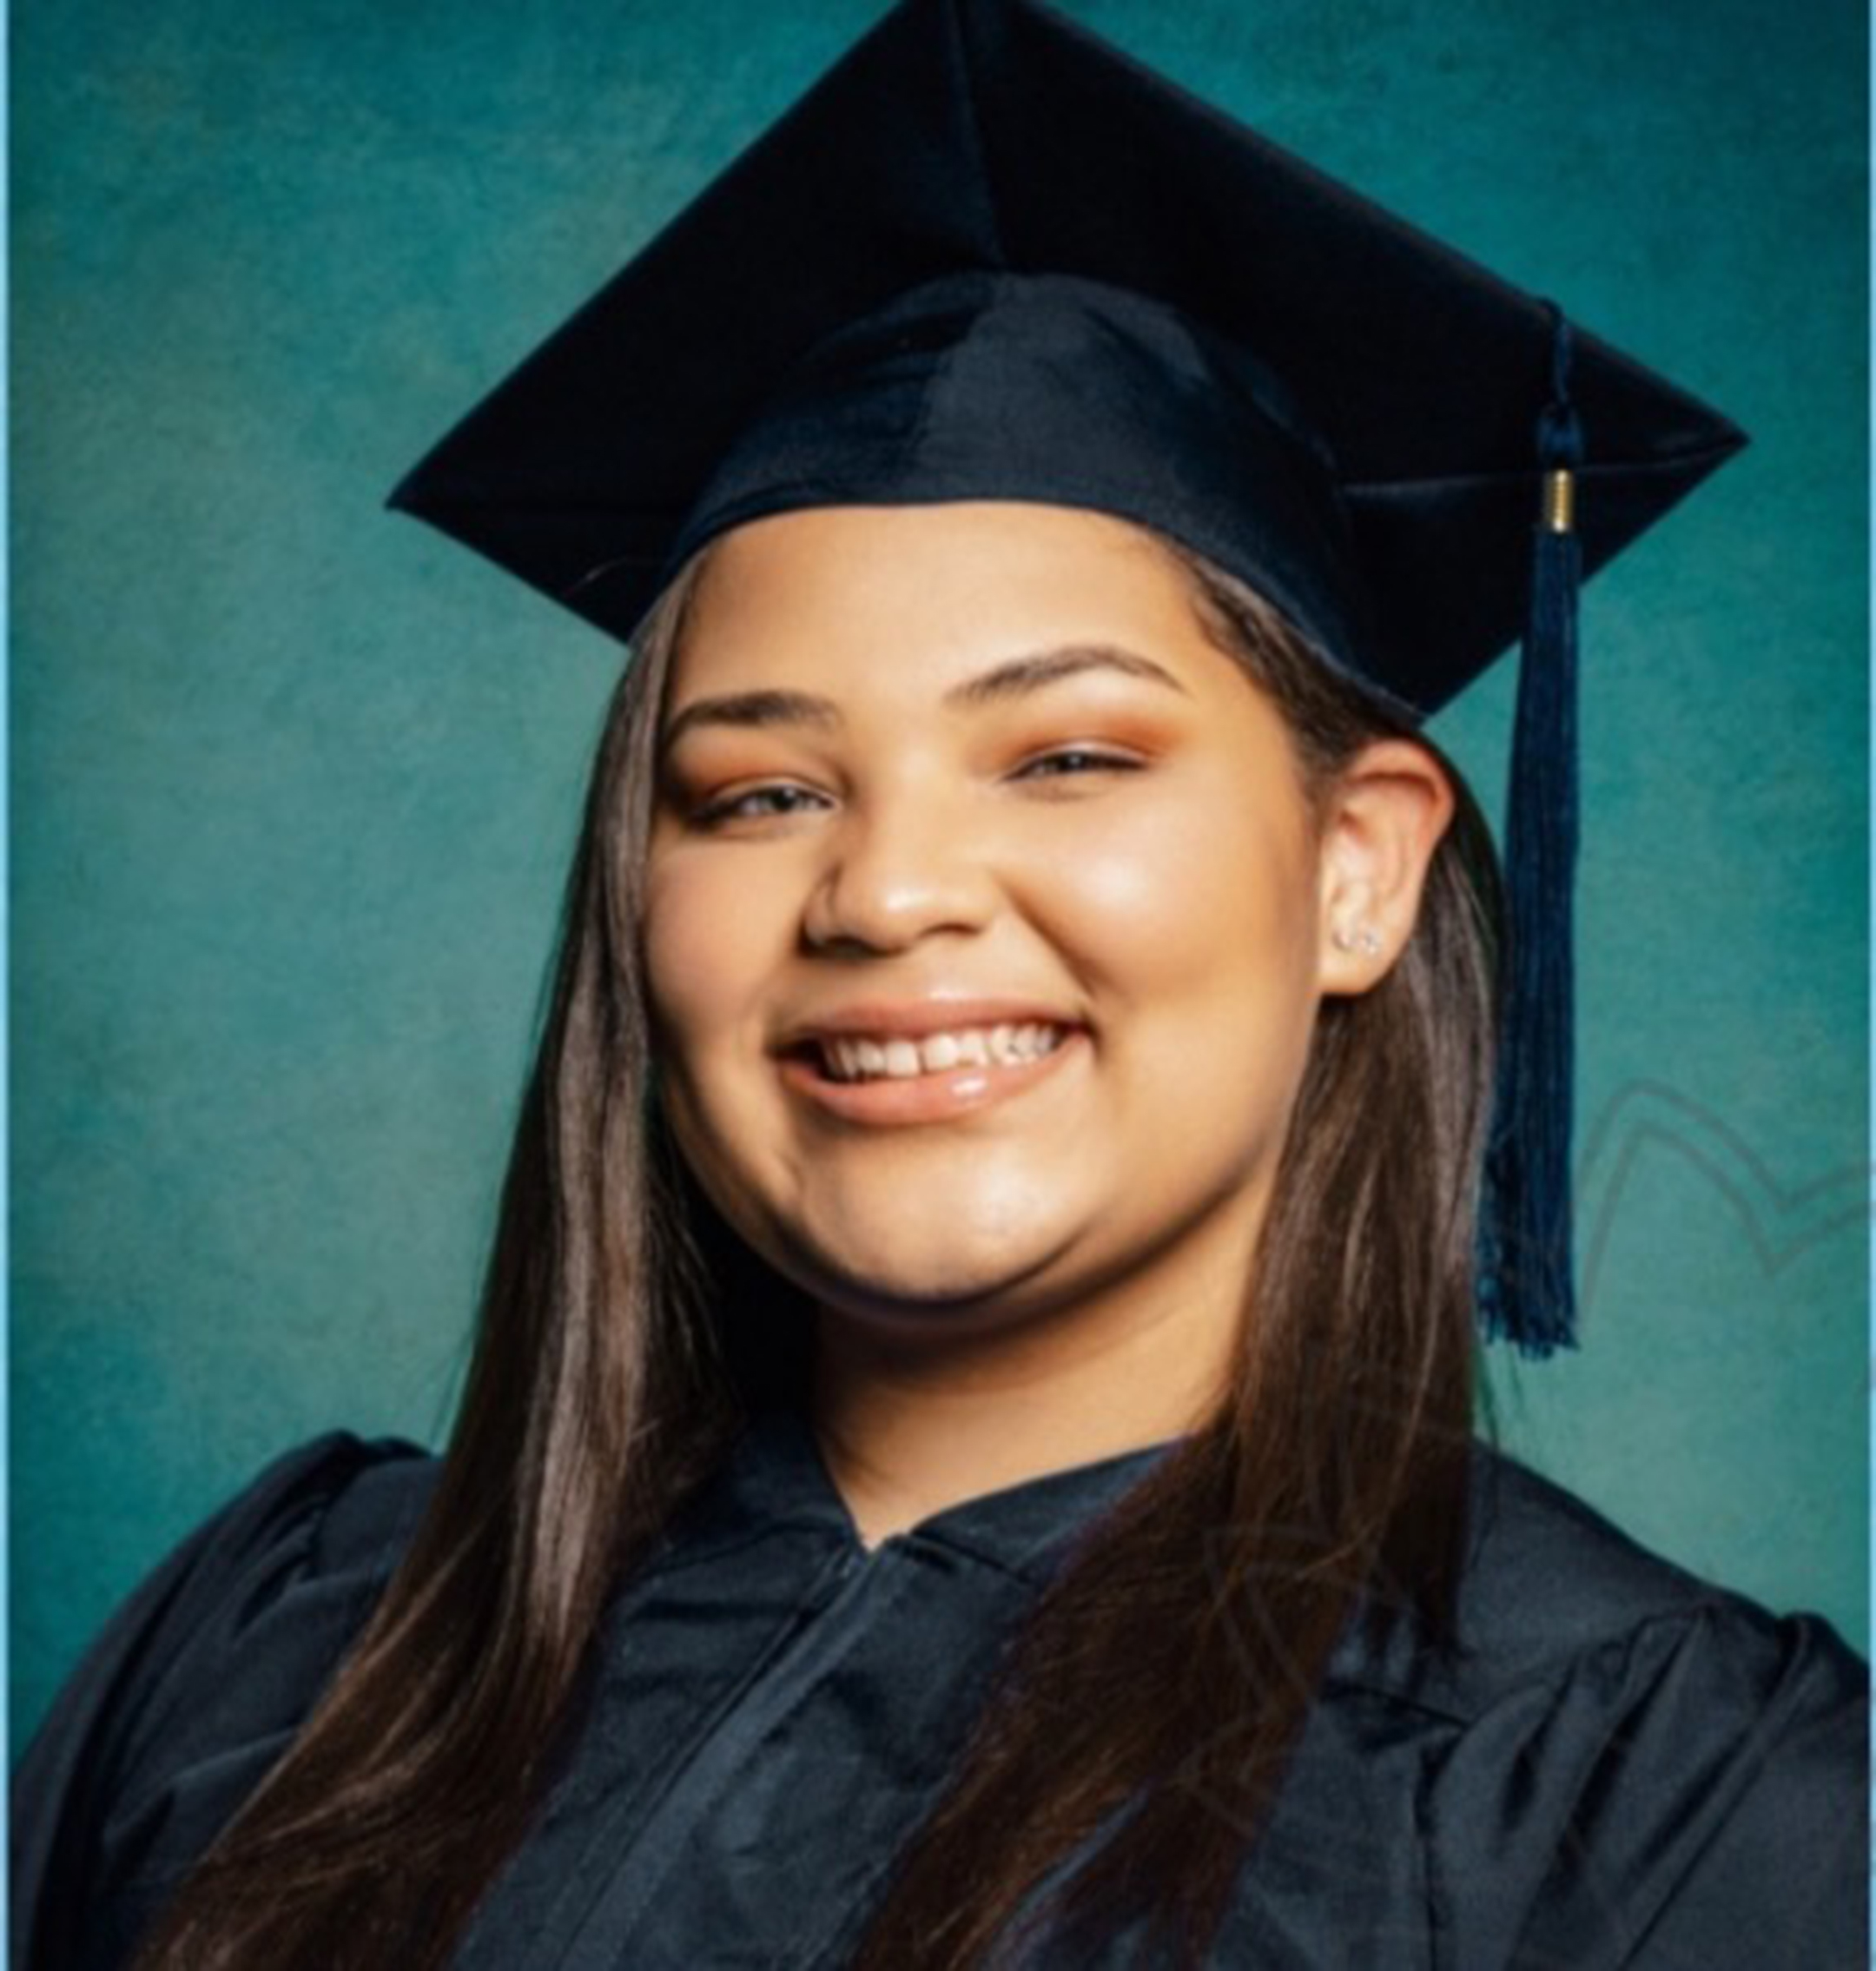 Headshot photo of Teanna Williams smiling in a graduation cap and gown against a green background